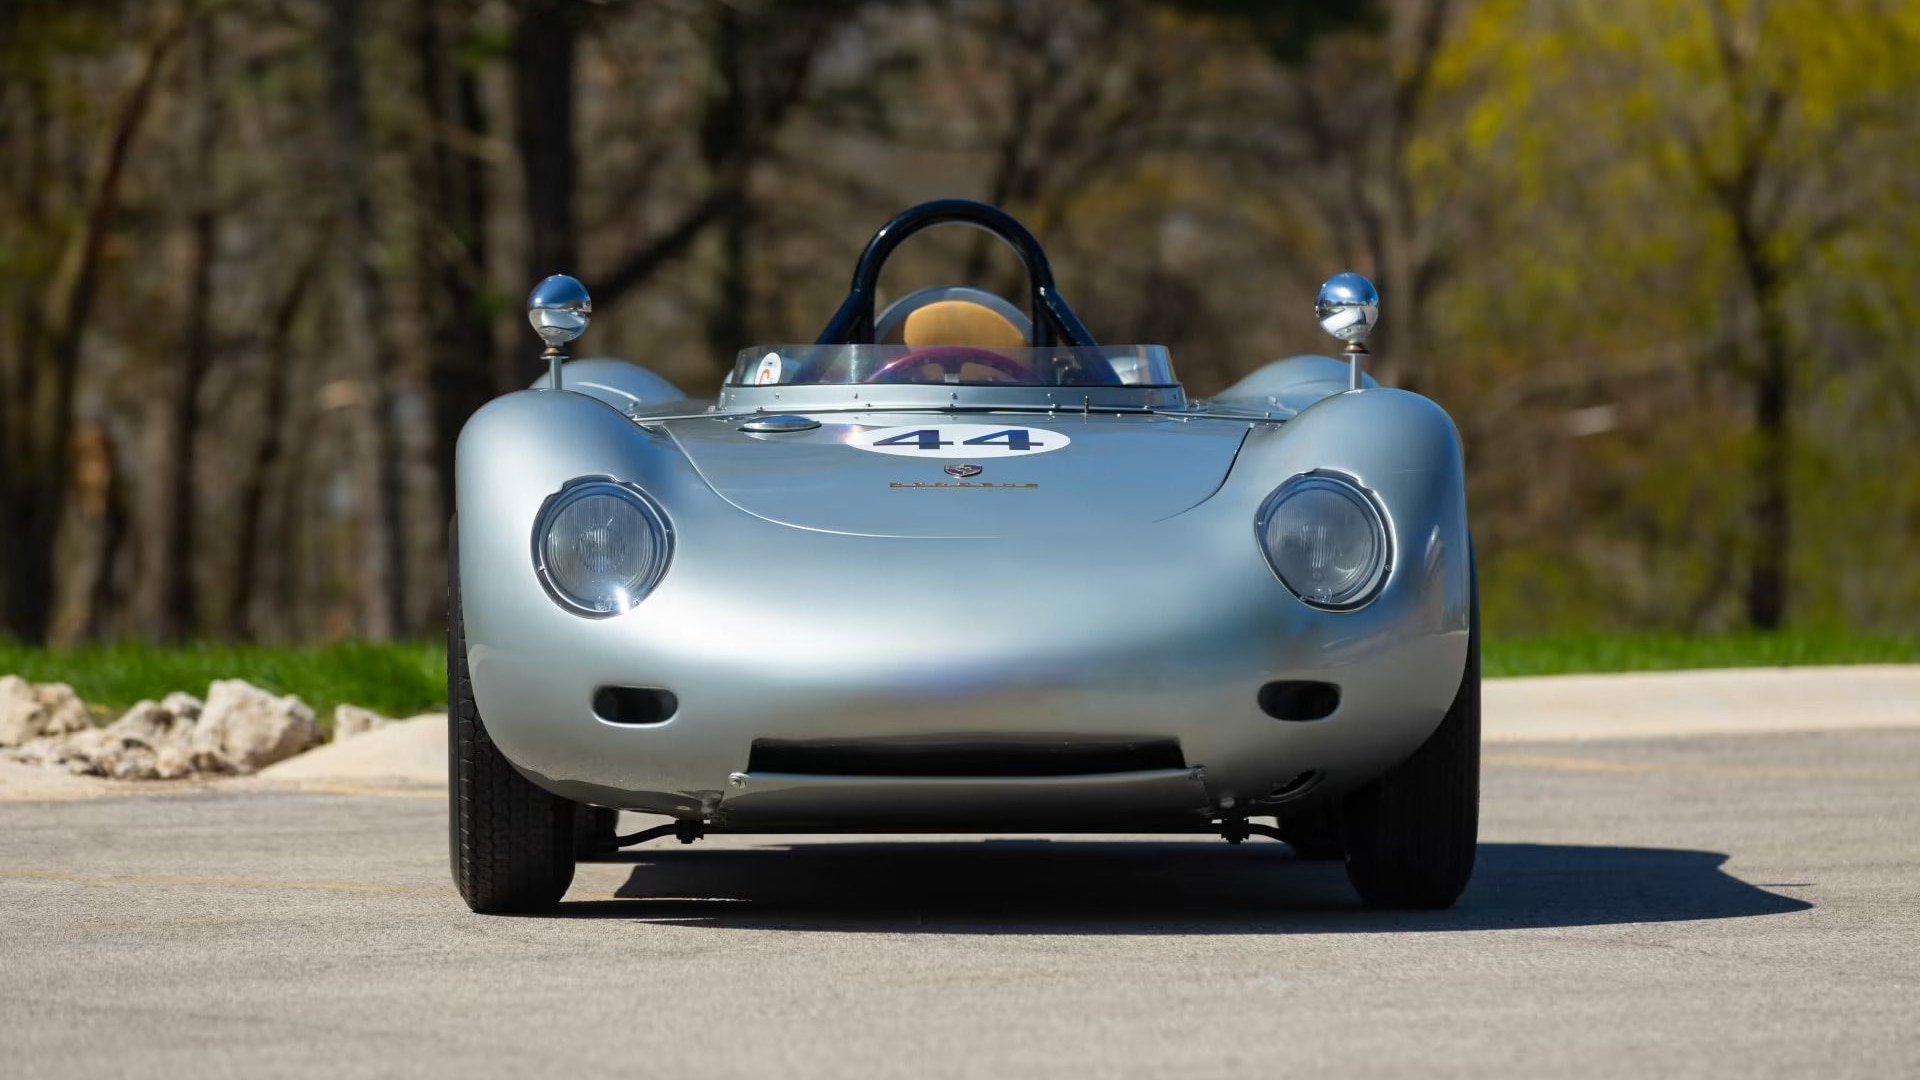 1959 Porsche 718 RSK bearing chassis no. 718-028 - Photo credit: Mecum